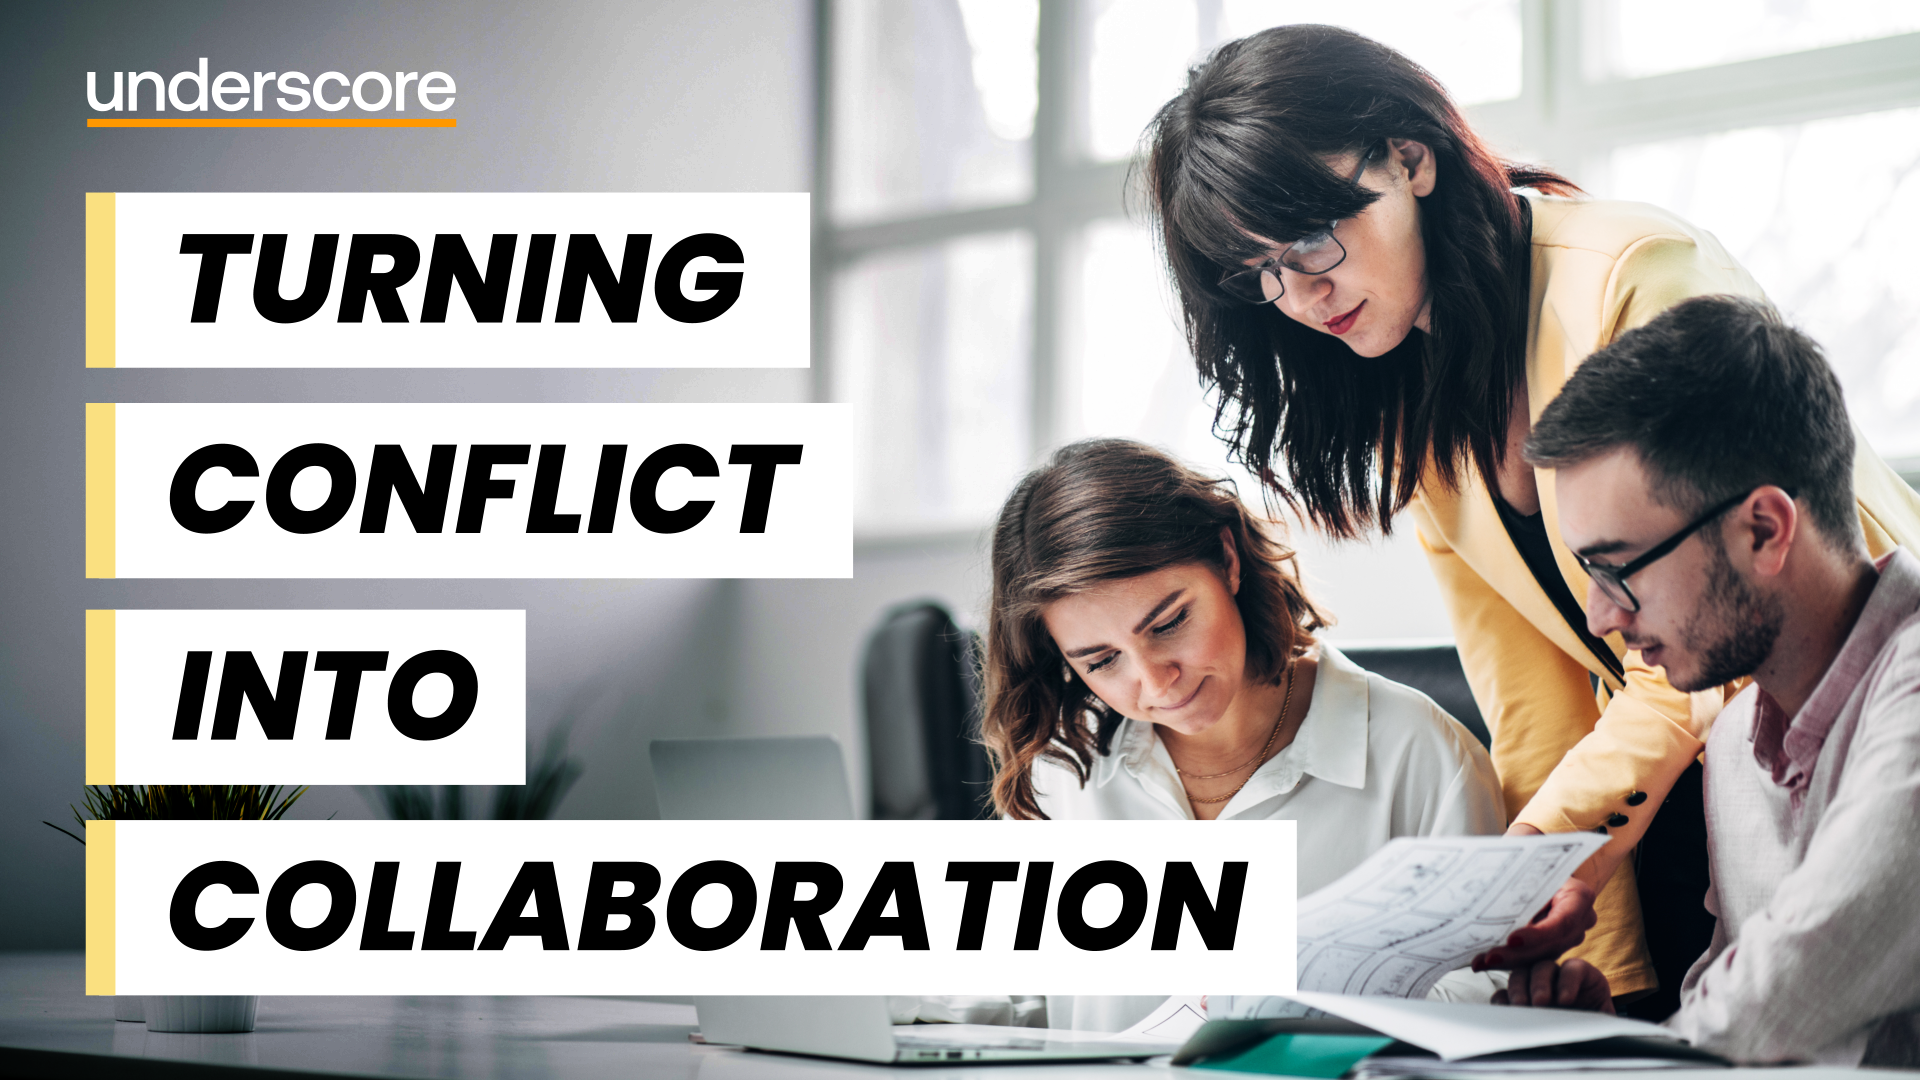 Turning conflict into collaboration